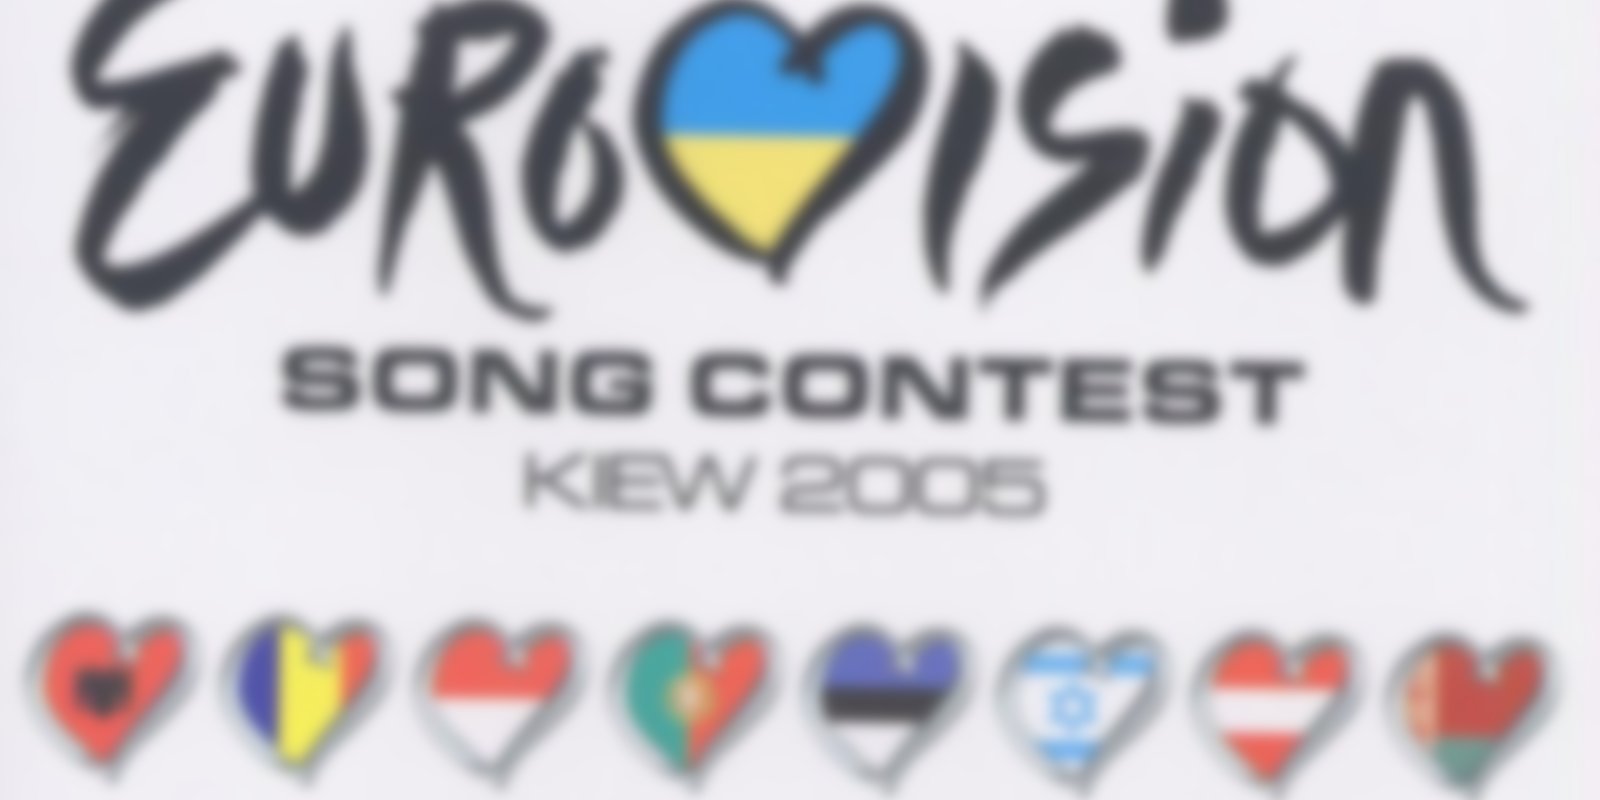 Eurovision Song Contest Kiew 2005